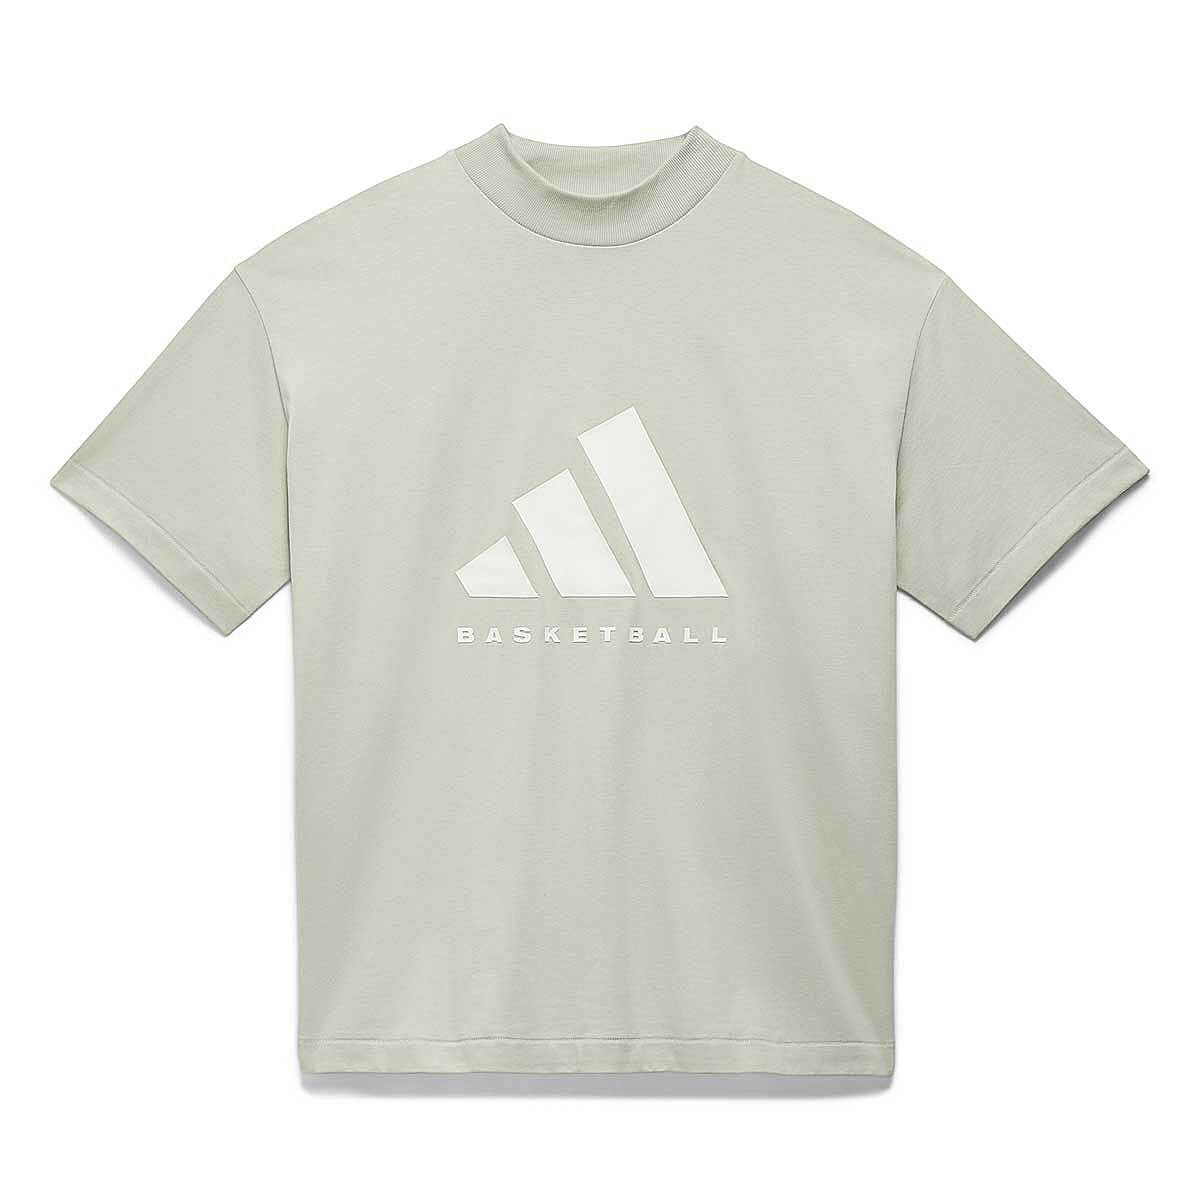 Adidas Chapter 1 T-shirt, Grün The sizing runs big. We recommend going one size smaller than usual.